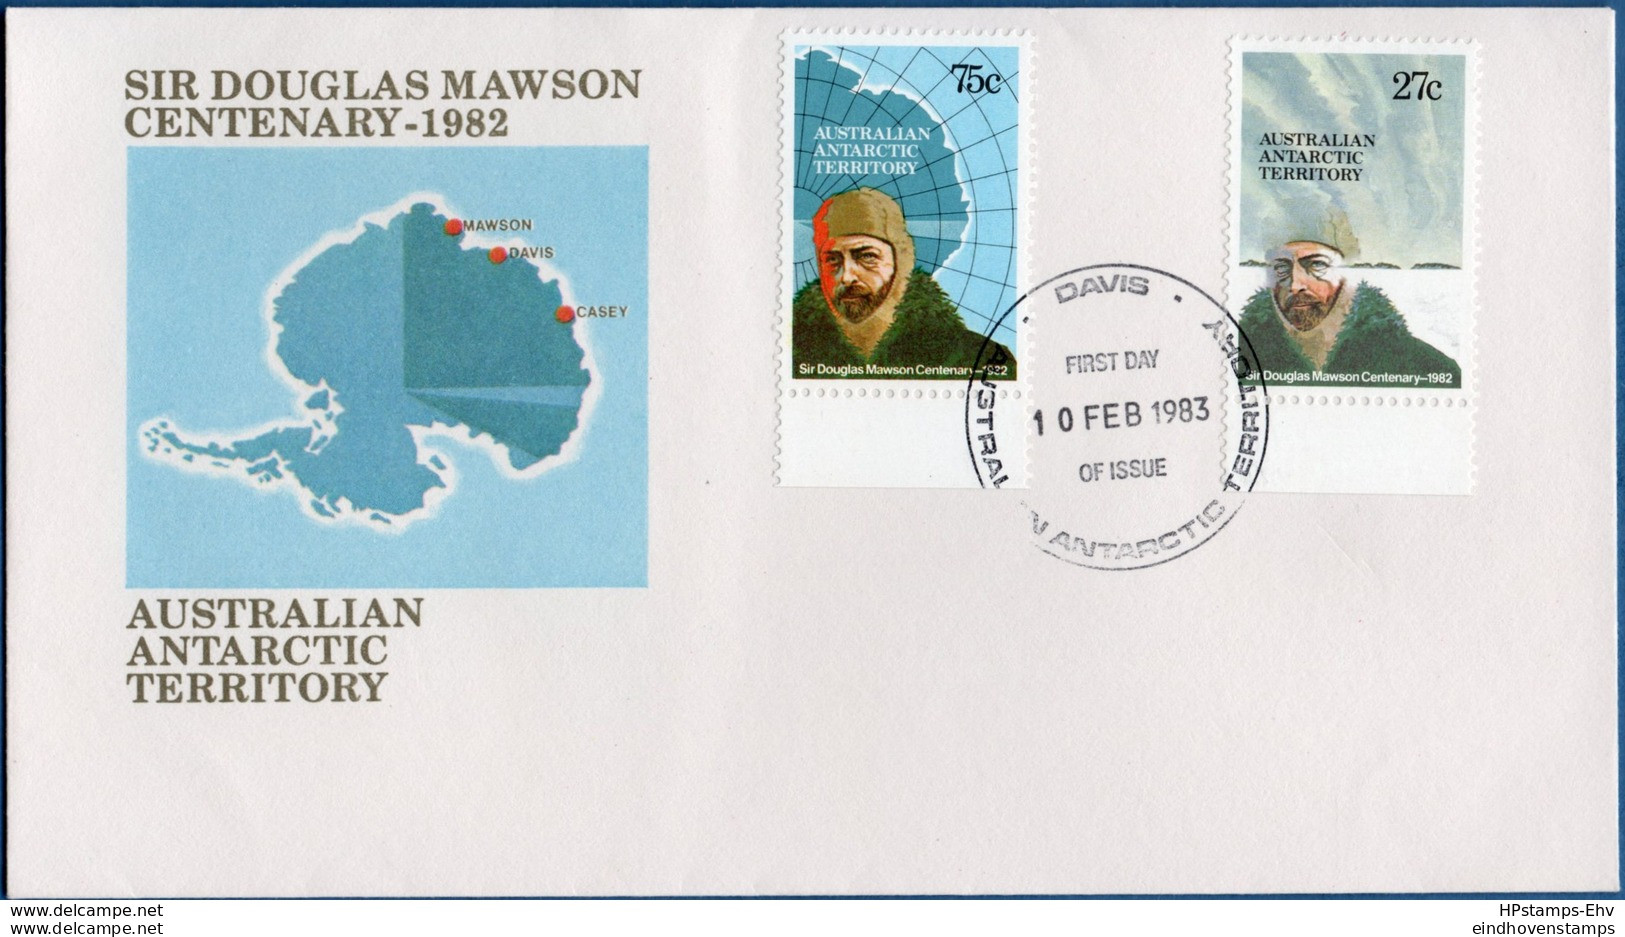 Antarctic Research - 1982 Australian Antarctic Mawson Centenary FDC Cancelled Davis - Not Dispatched - 2003.2905 - Research Programs